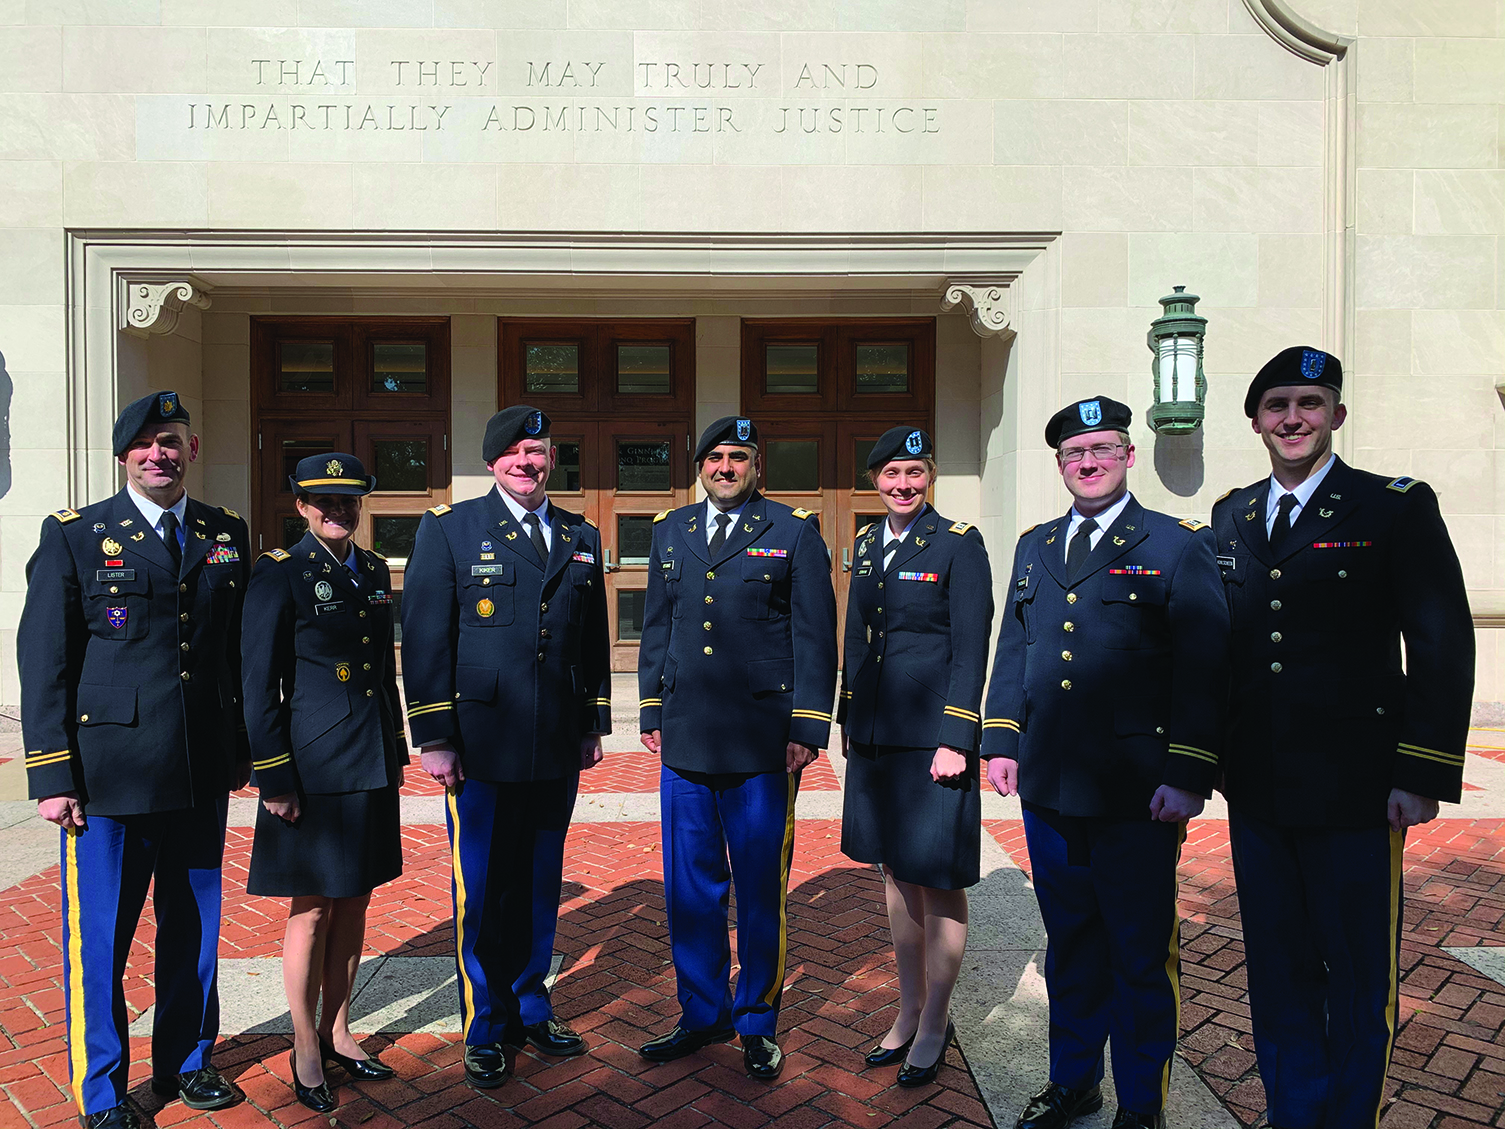 Members of the III Corps Military Justice Team attend an ACCA Outreach Oral Argument at the University of Texas School of Law in Austin, Texas (from left to right: LTC Shaun Lister, CPTs Callin Kerr, Cadman Kiker, Jason Otano, Emily Ervin, and Erik Thomas, and 1LT Connor Kohlscheen).